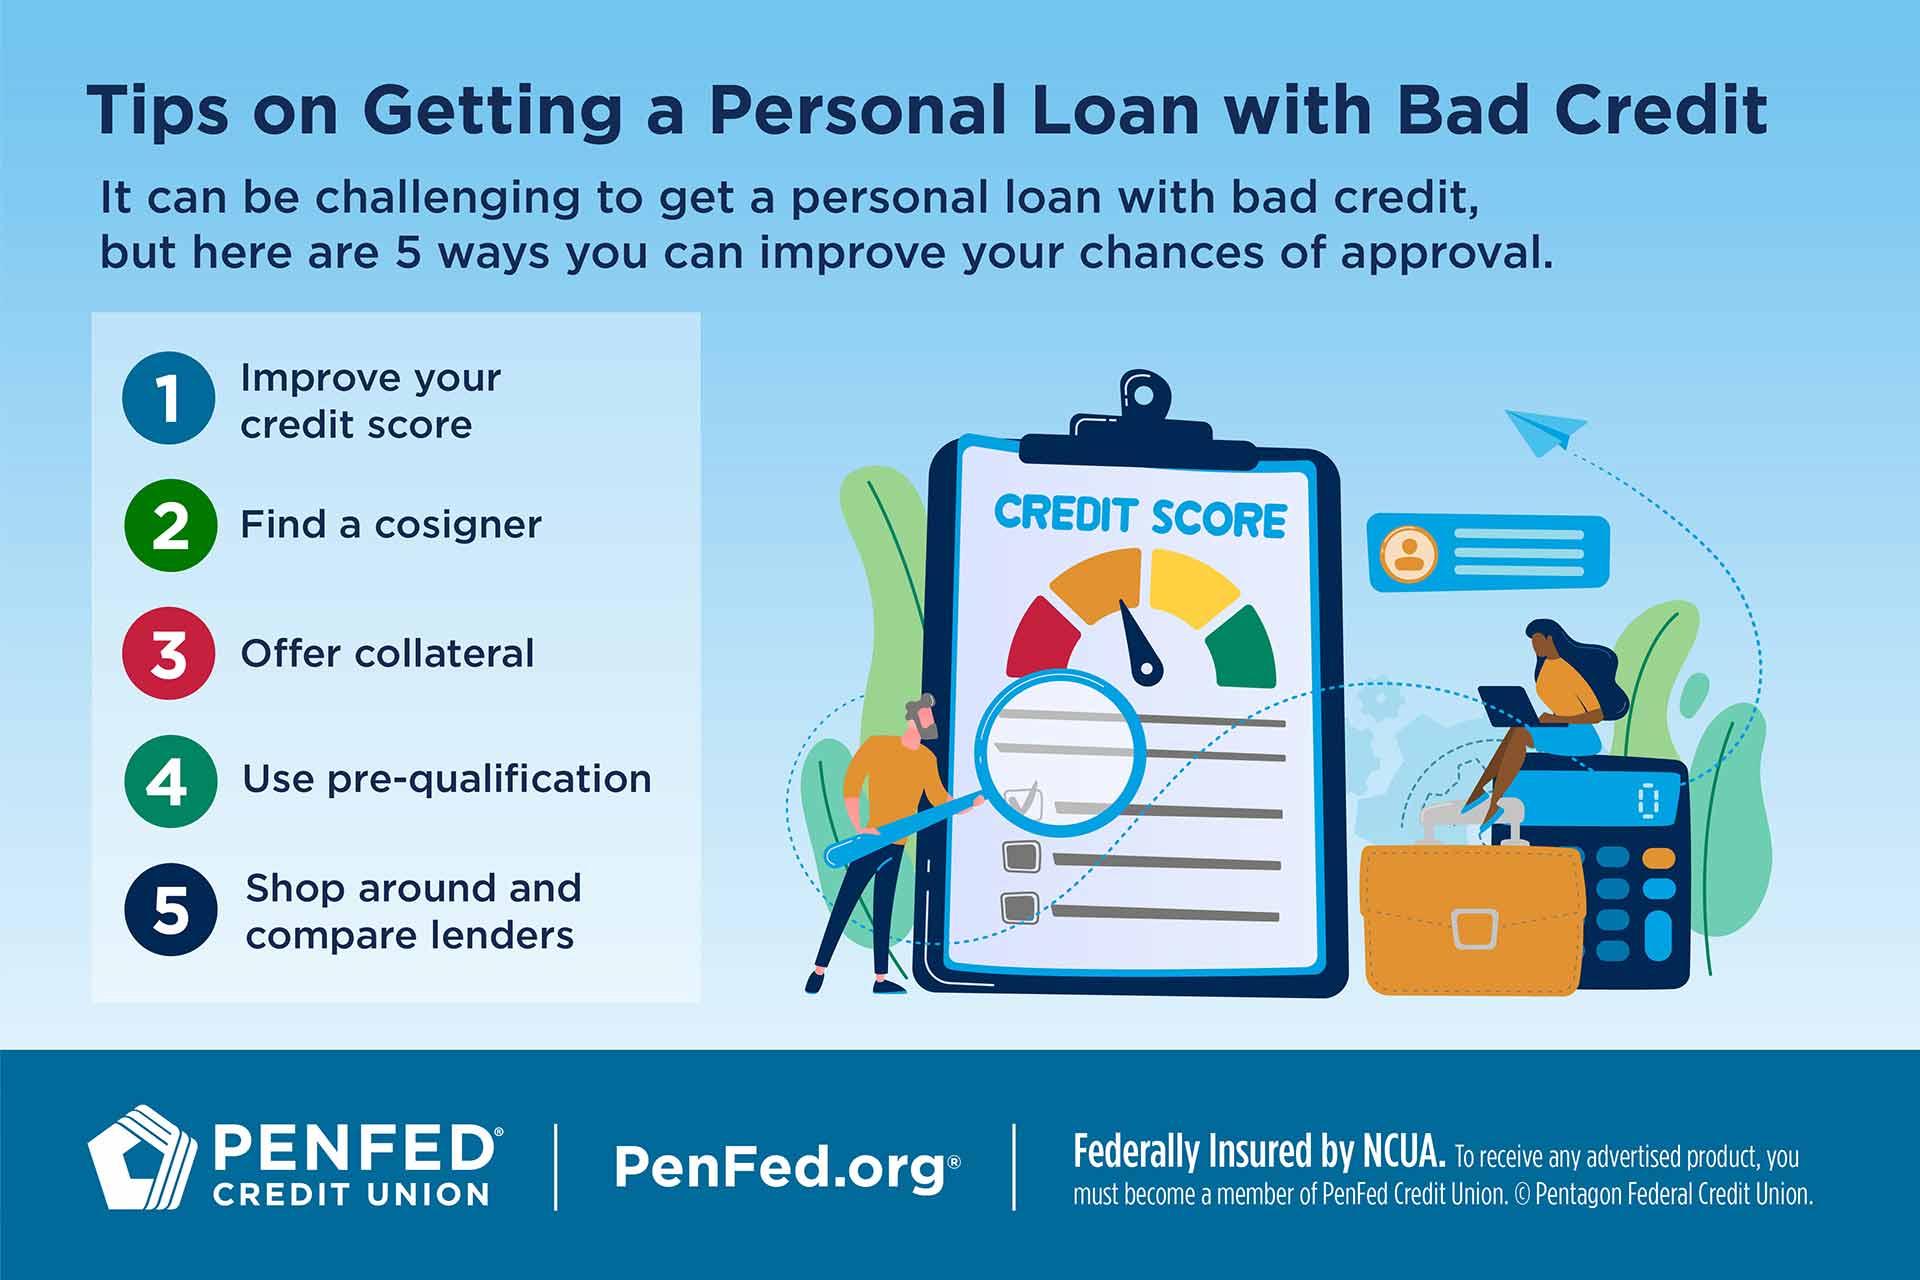 Tips on getting a personal loan with bad credit